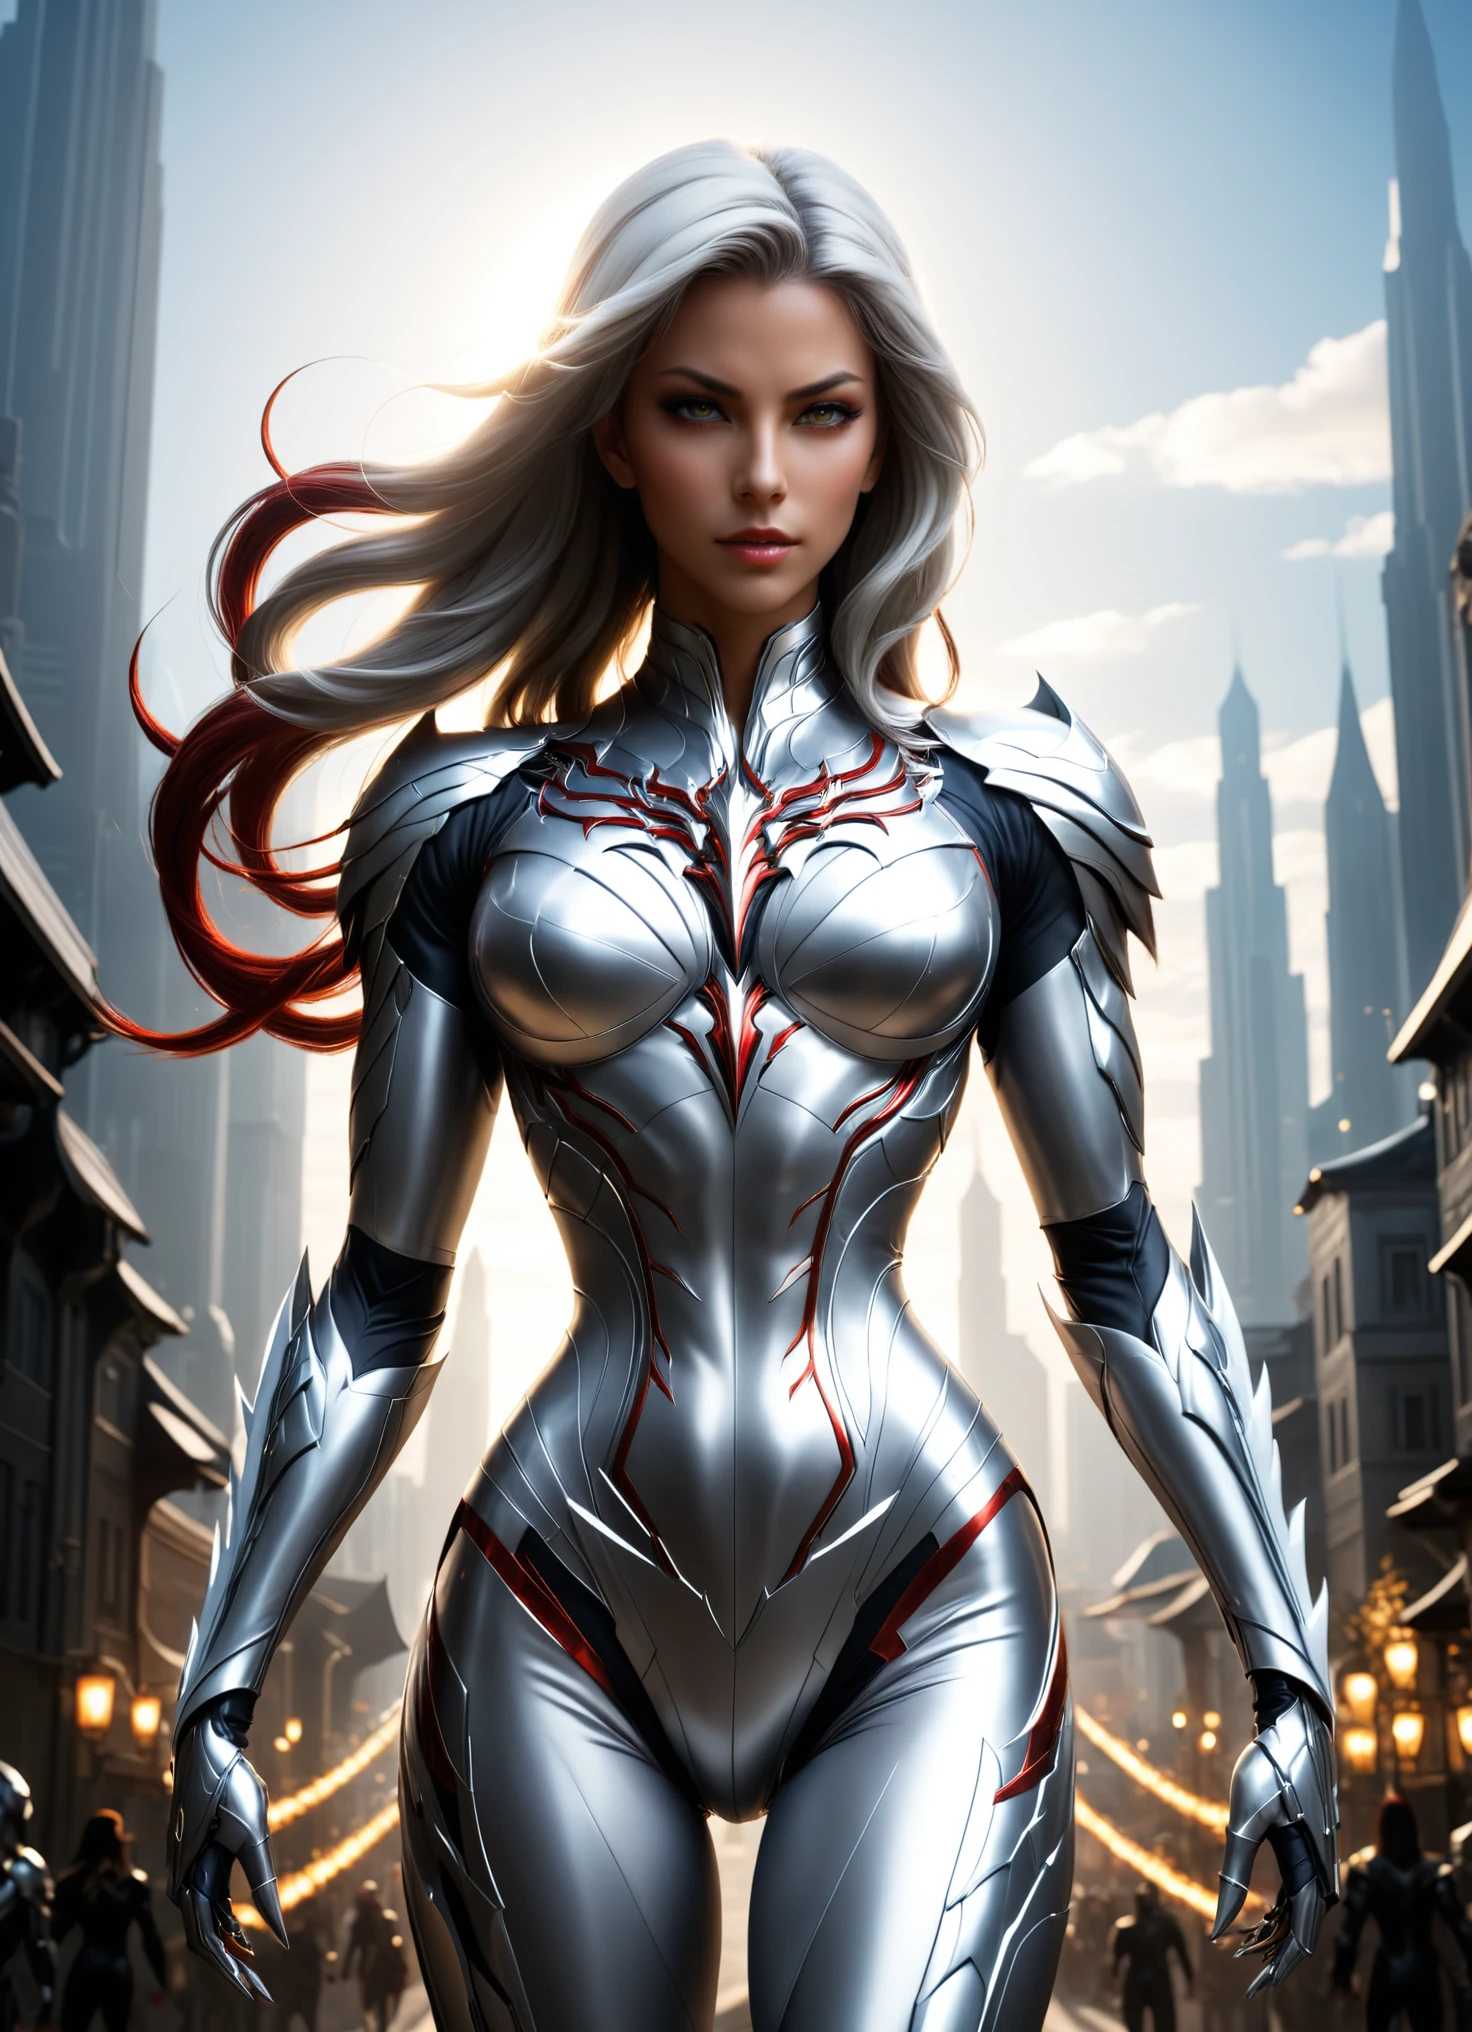 concept art (Digital Artwork:1.3) of (Simple illustration:1.3) a woman in a silver and white costume standing in a city, from lineage 2, wearing witchblade armor, lineage 2 revolution style, unreal engine render saint seiya, of a beautiful female warframe, from ncsoft, silver armor and red clothing, hyperdetailed fantasy character, style game square enix, unreal engine render a goddess, 8 k character details CGSociety,ArtStation,(Low Contrast:1.3) . digital artwork, illustrative, painterly, matte painting, highly detailed